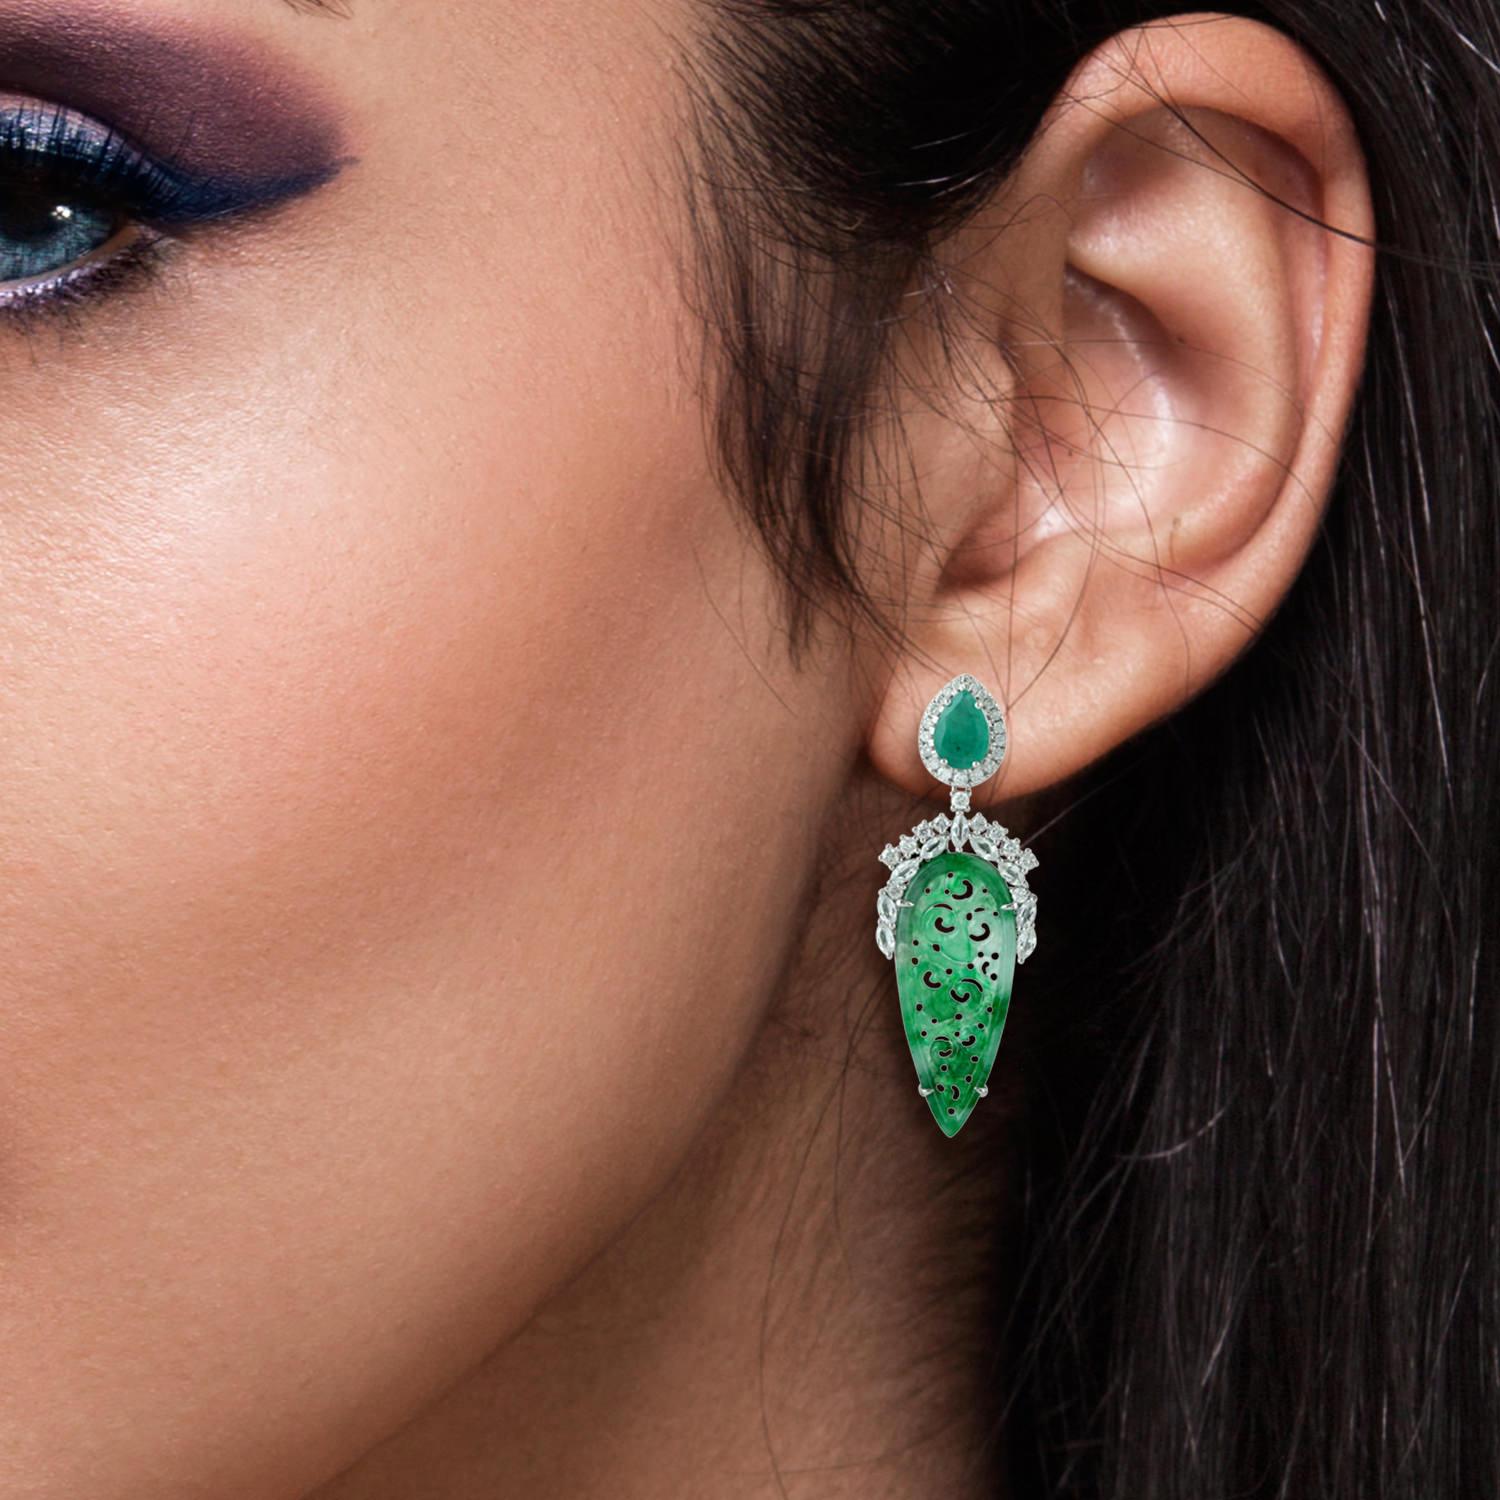 These stunning hand carved Jade earrings are thoughtfully and meticulously crafted in 18-karat white gold. It is set in 8.13 carats Jade, 1.38 carats emerald, .79 carats sapphire and .57 carats of sparkling diamonds.

FOLLOW  MEGHNA JEWELS